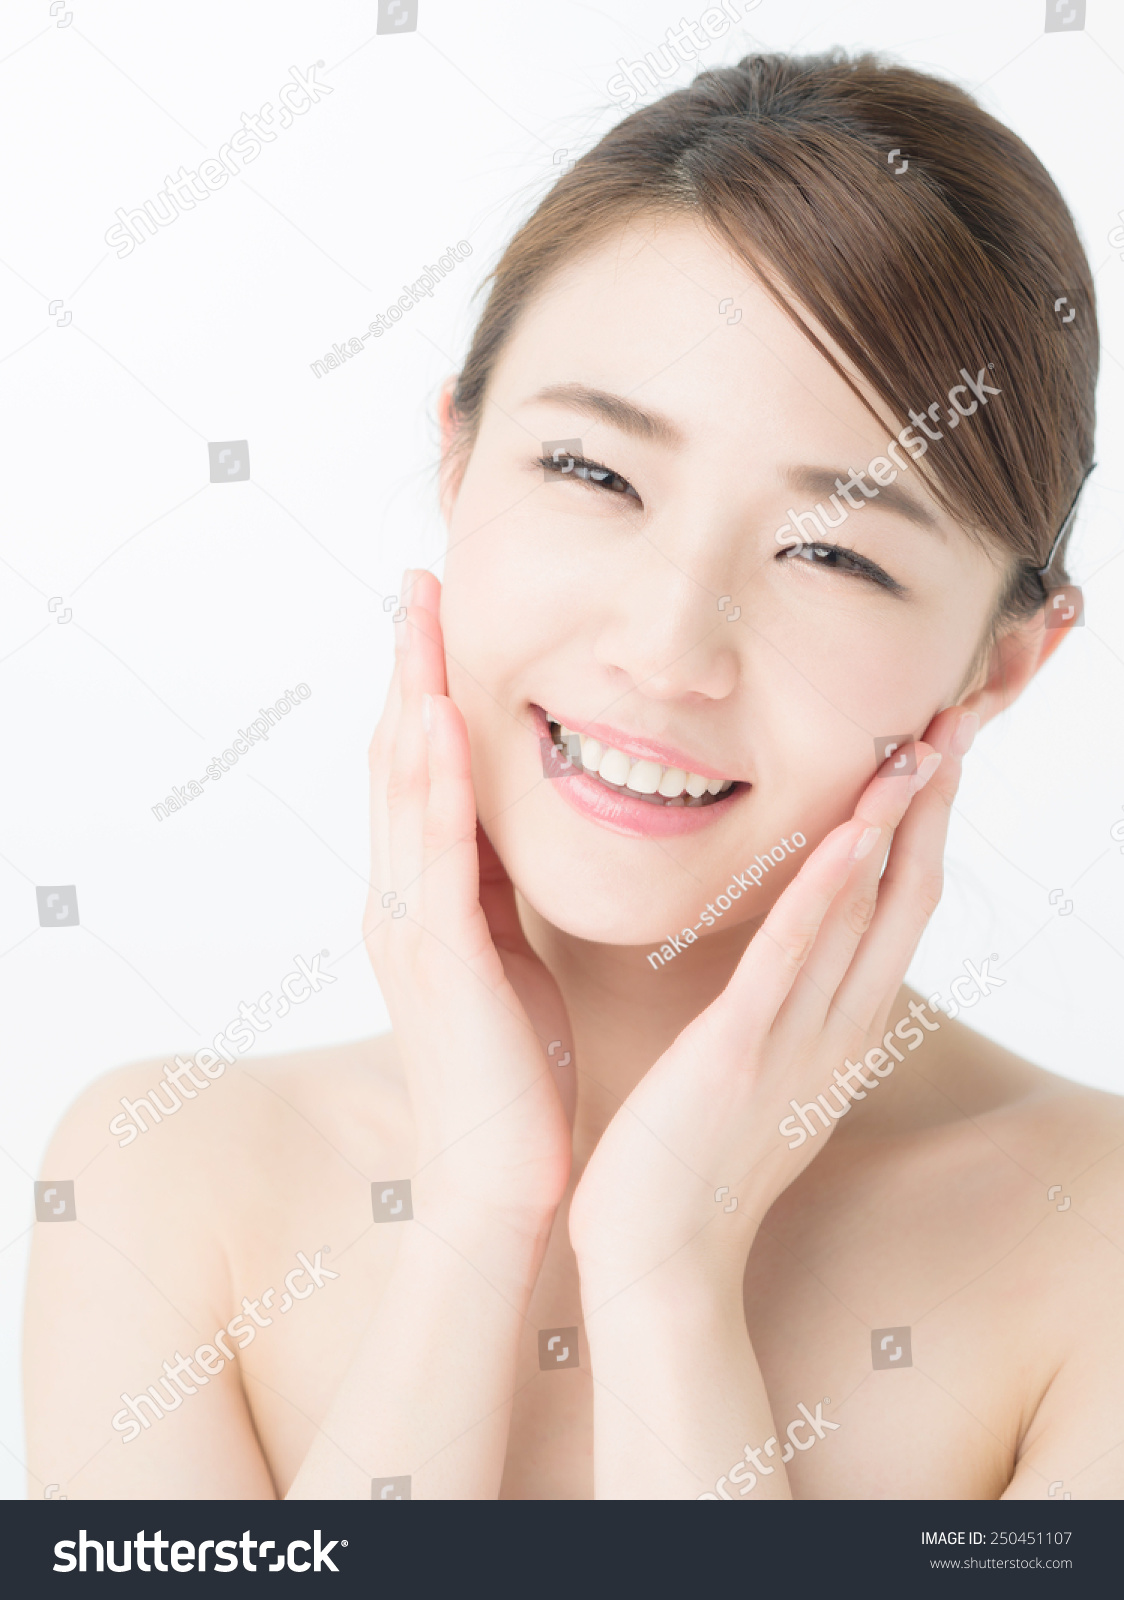 attractive asian woman skin care image on white background #250451107